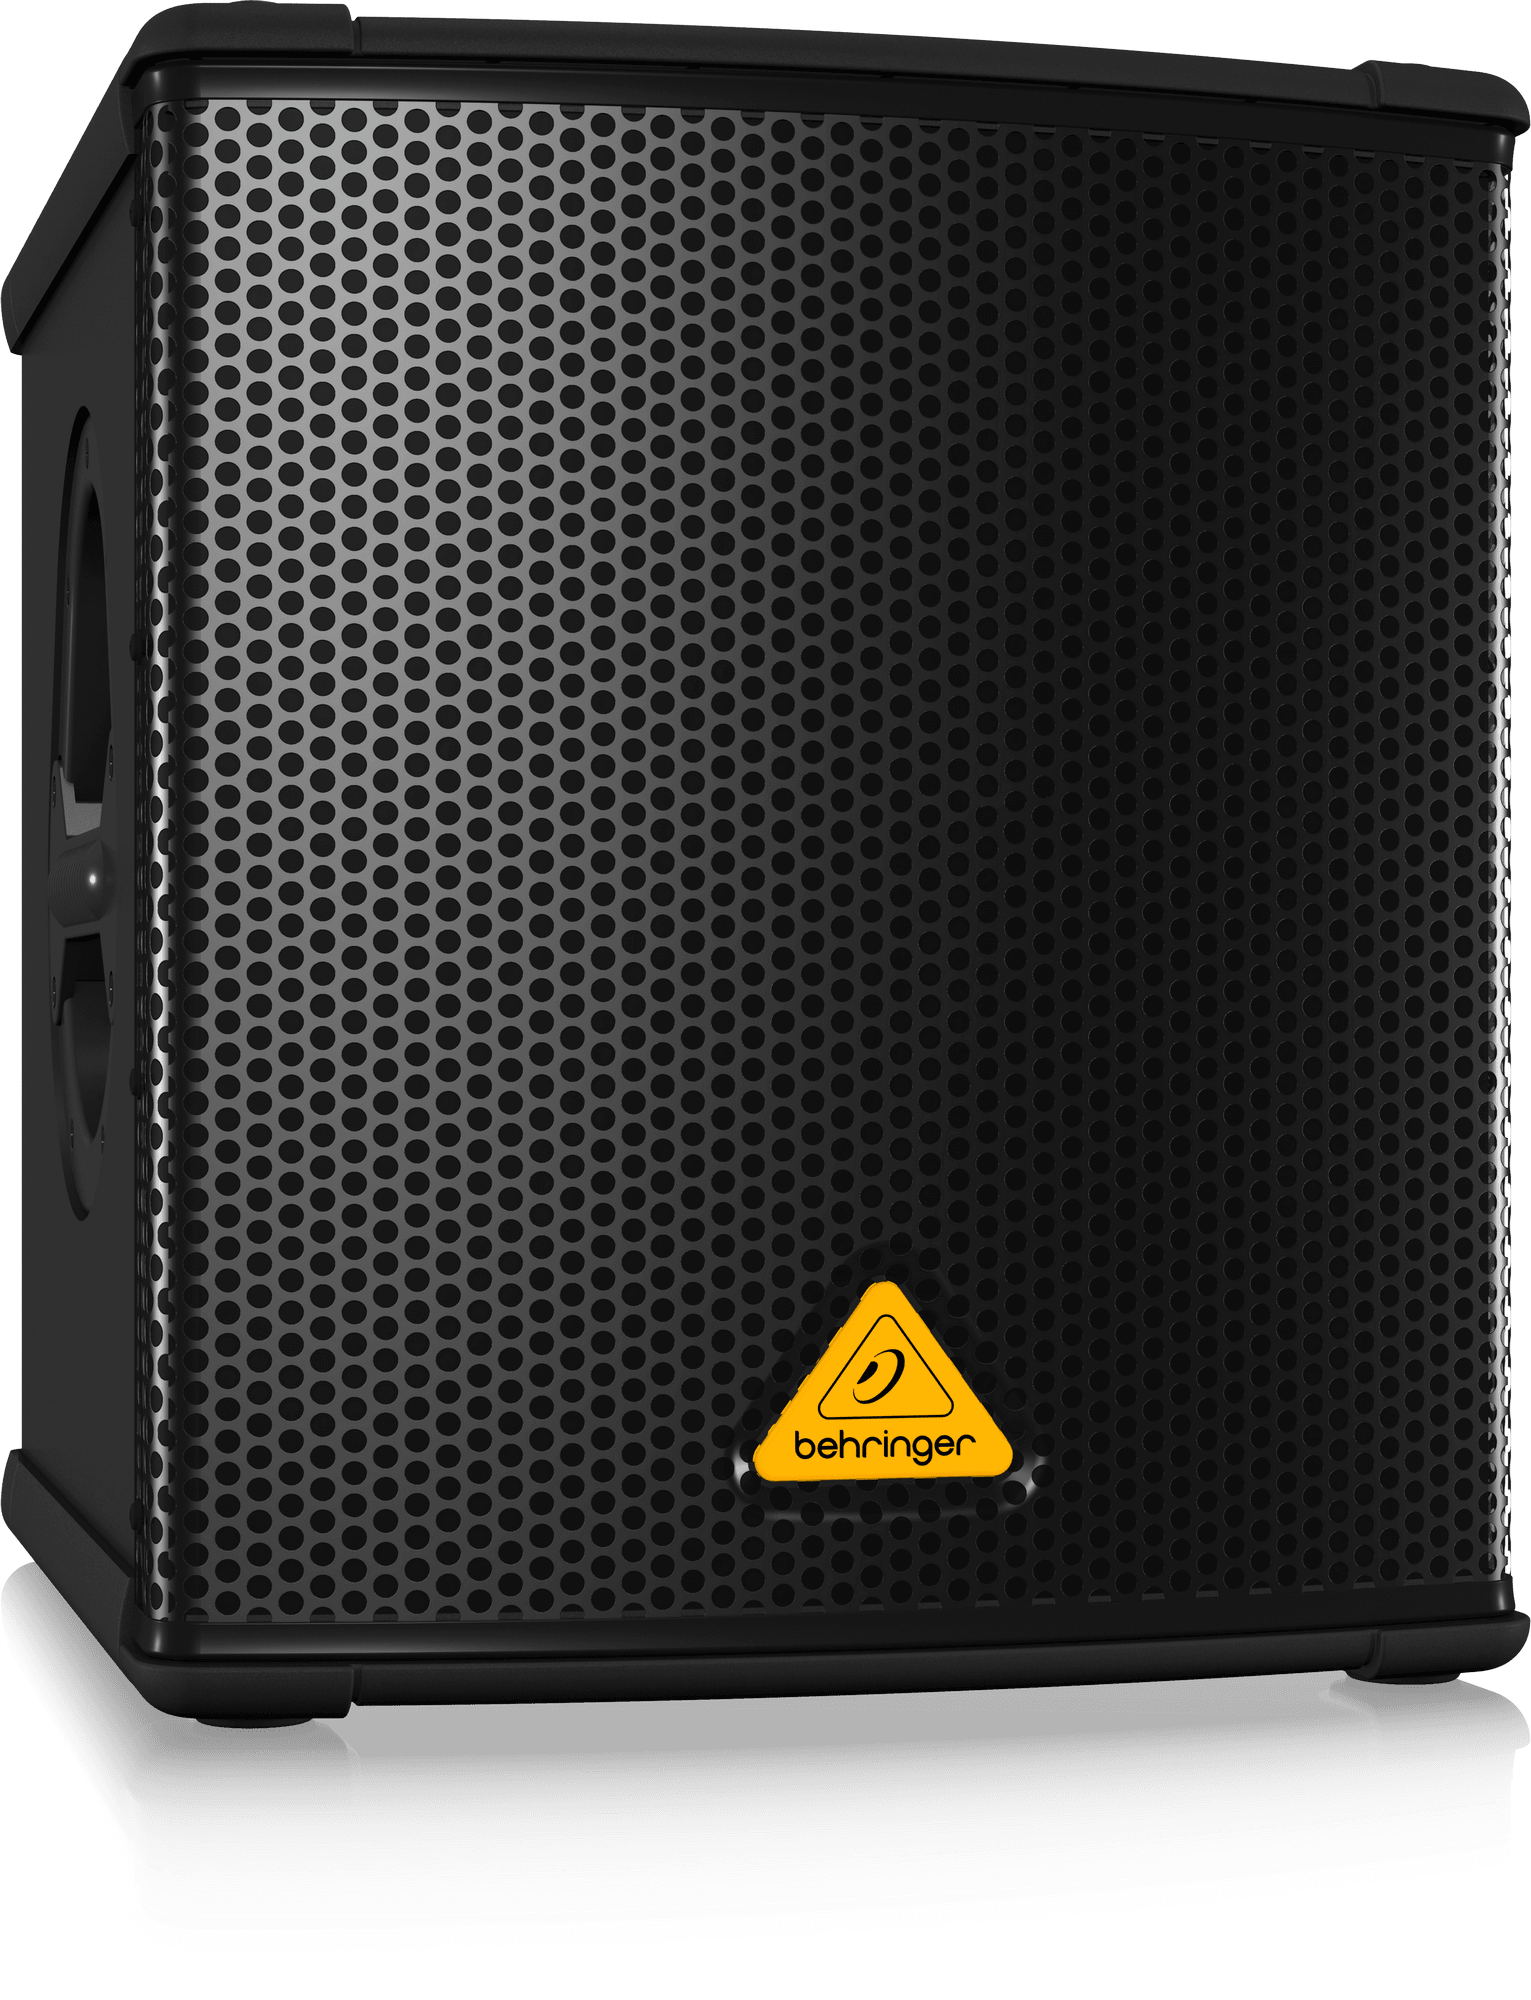 Behringer B1200D-PRO High-Performance Active 500 Watt 12" PA Subwoofer with Built-In Stereo Crossover | BEHRINGER , Zoso Music